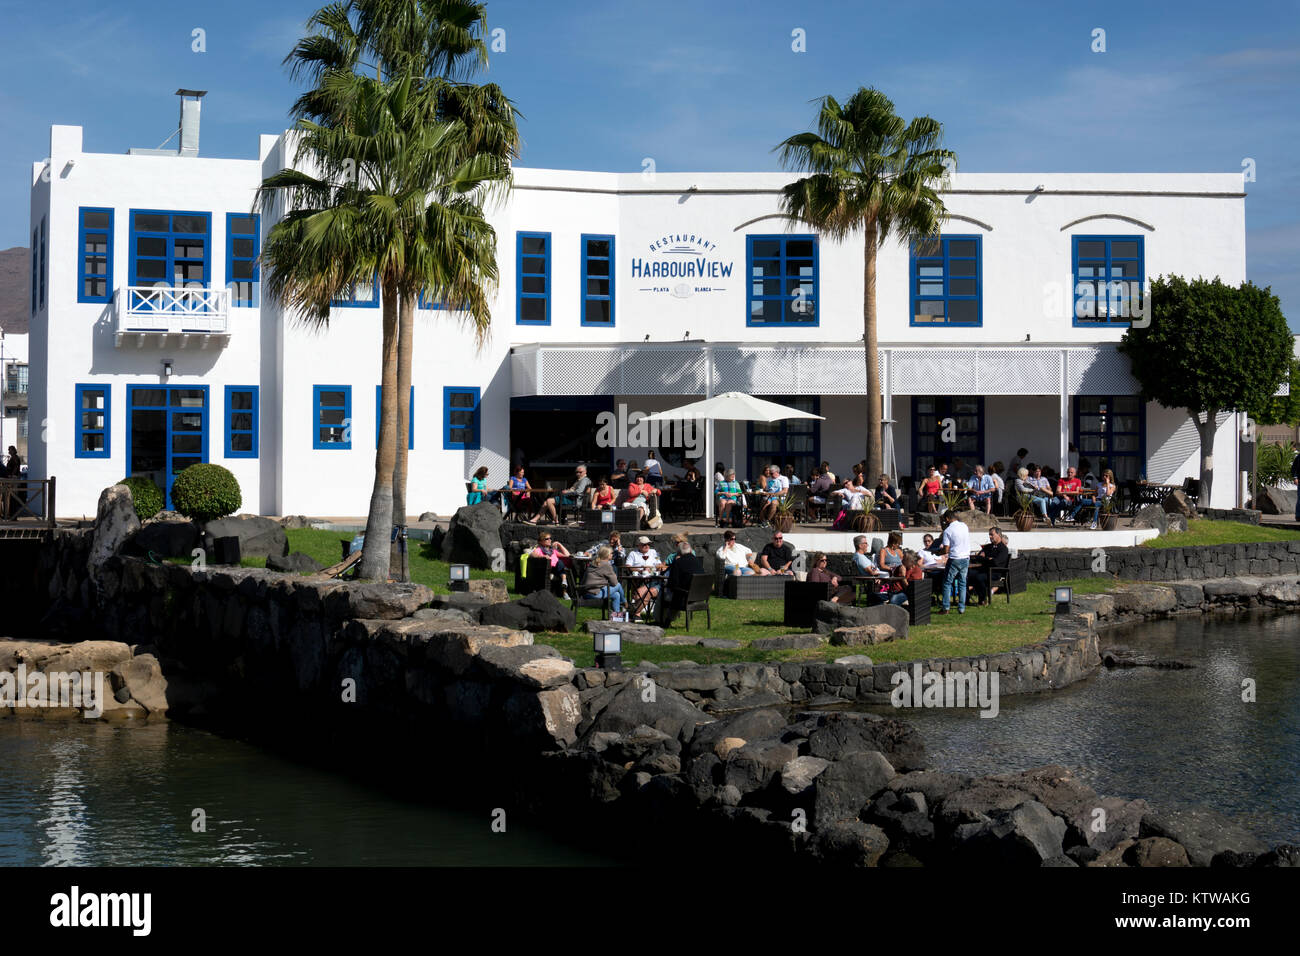 The Harbour View restaurant, Playa Blanca, Lanzarote, Canary Islands, Spain. Stock Photo